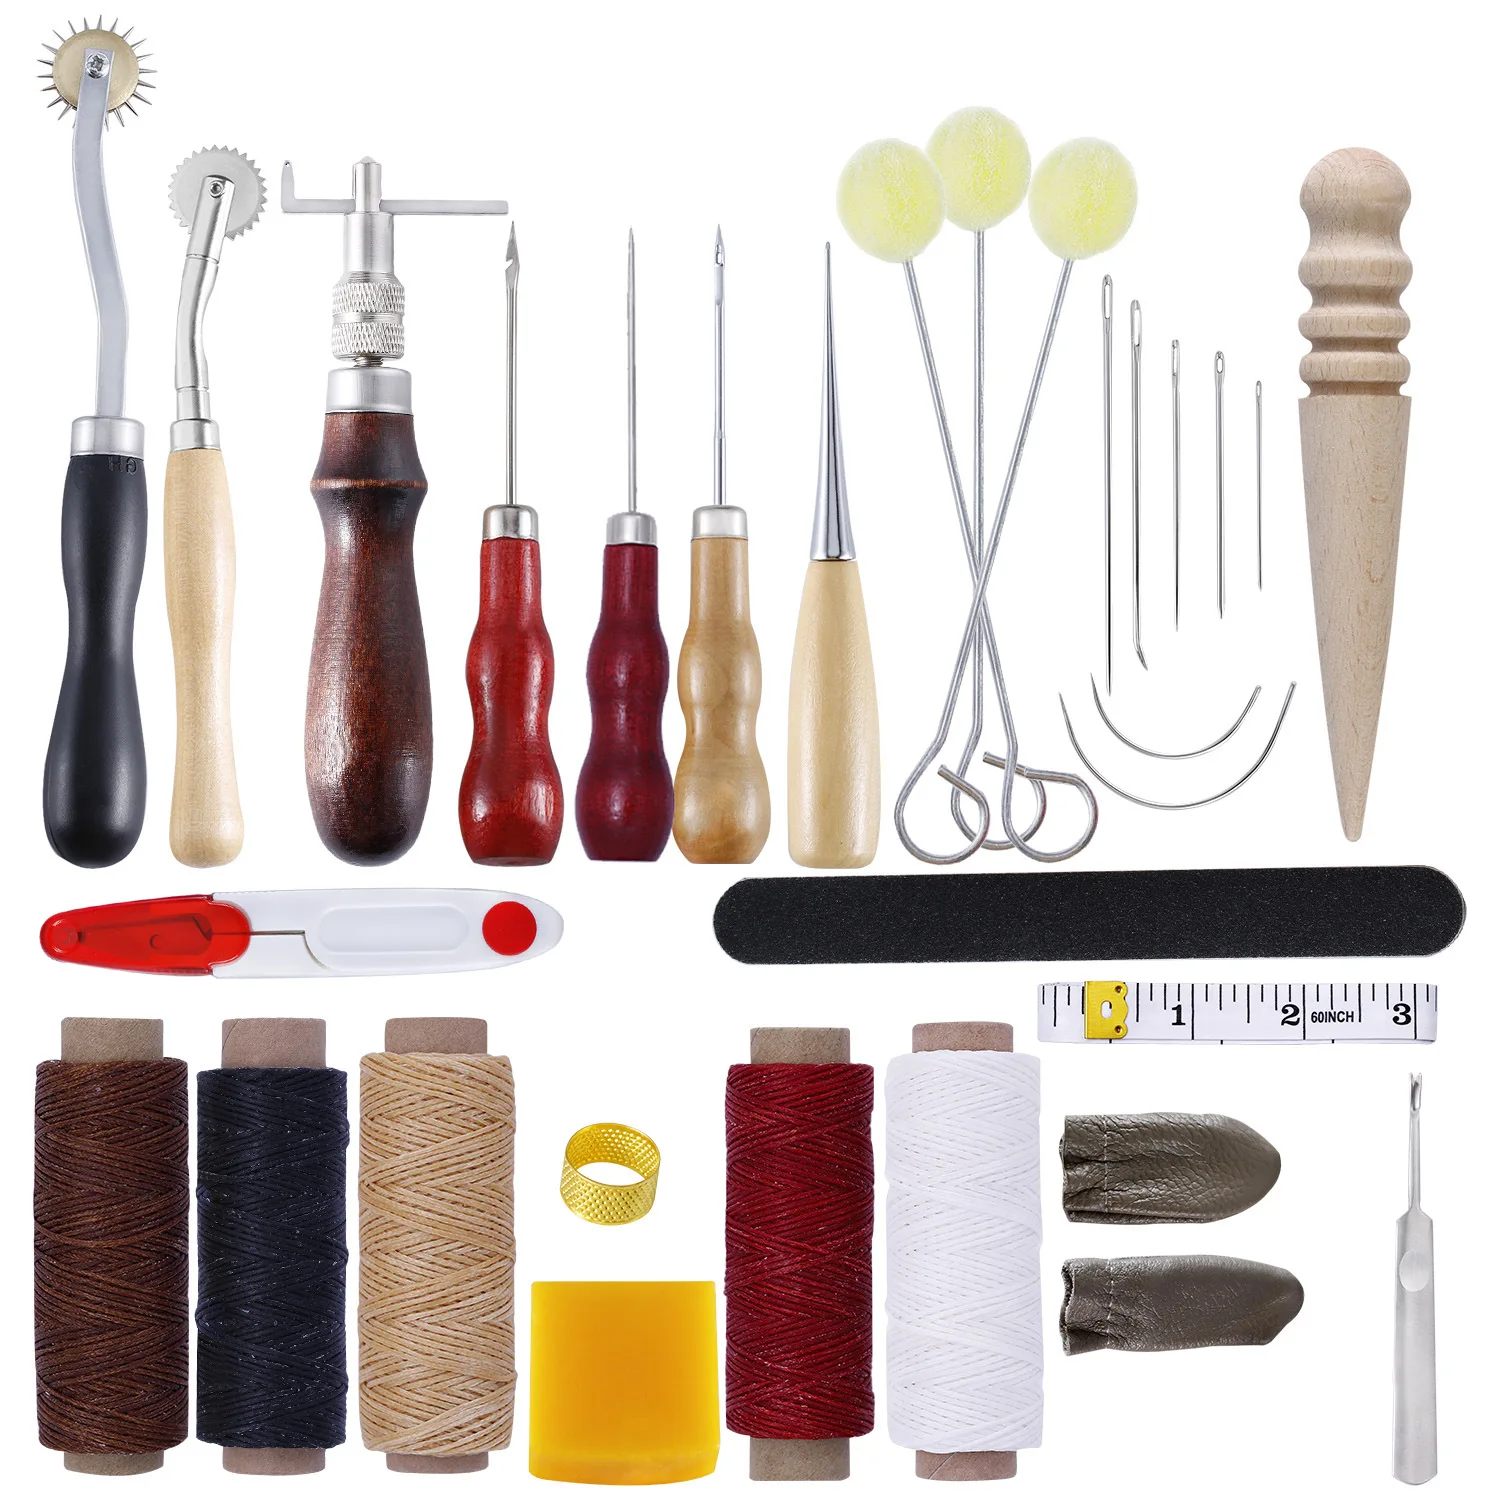 22pcs Leather Craft Professional Leather Sewing Kit DIY Hand Stitching Tools 